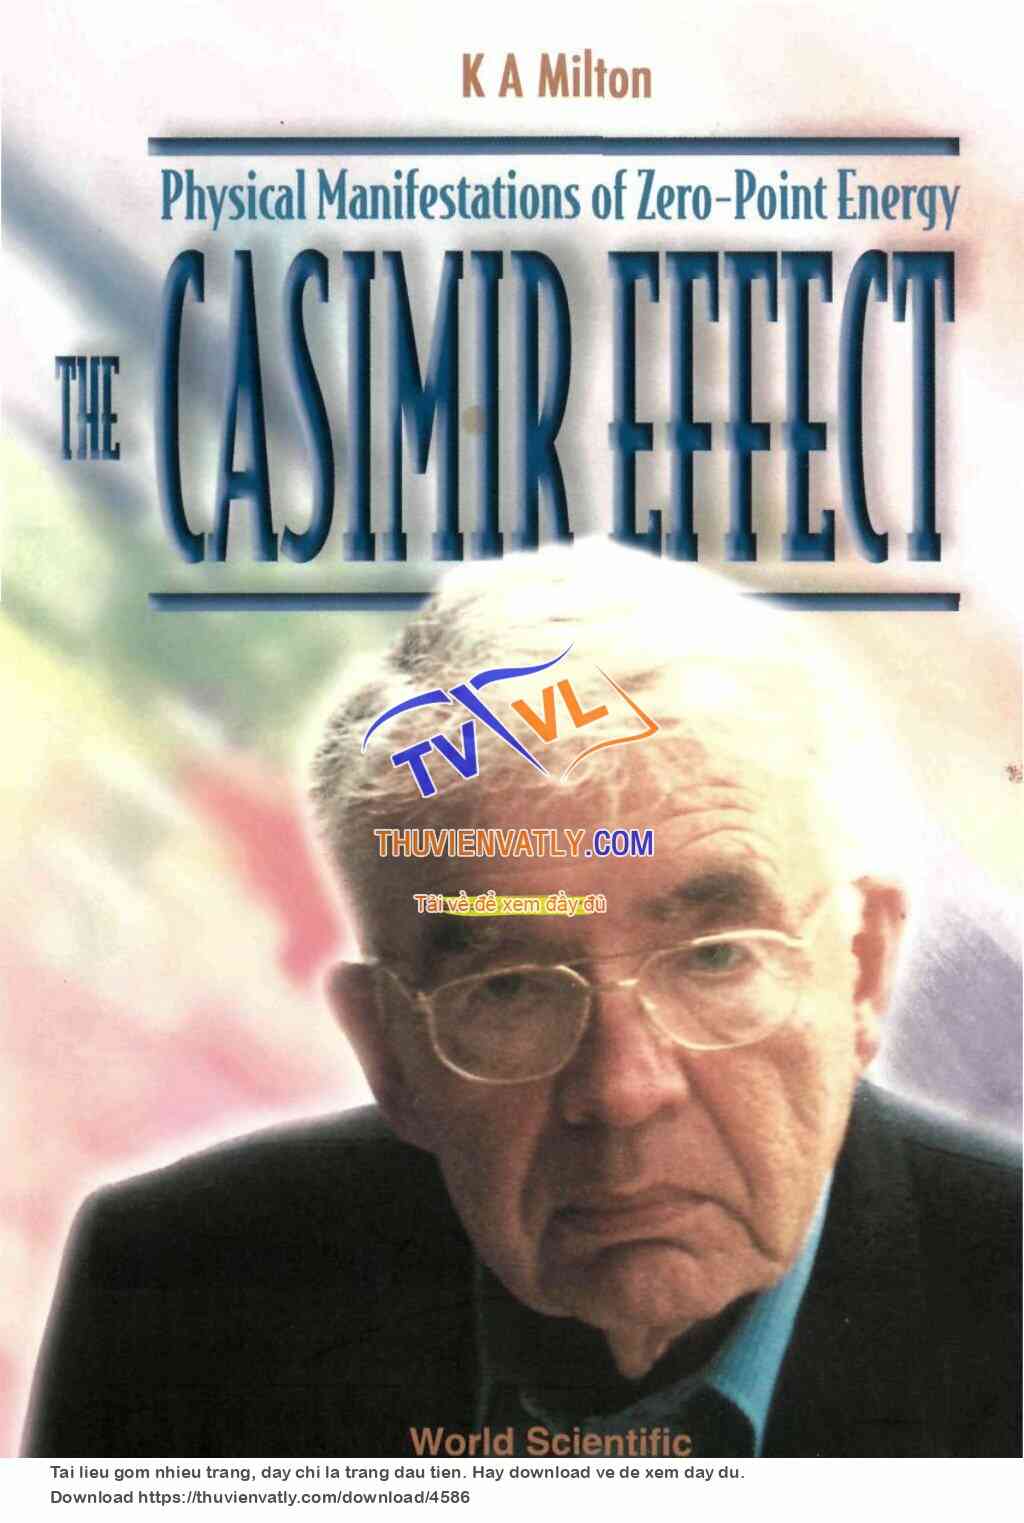 The Casimir Effect